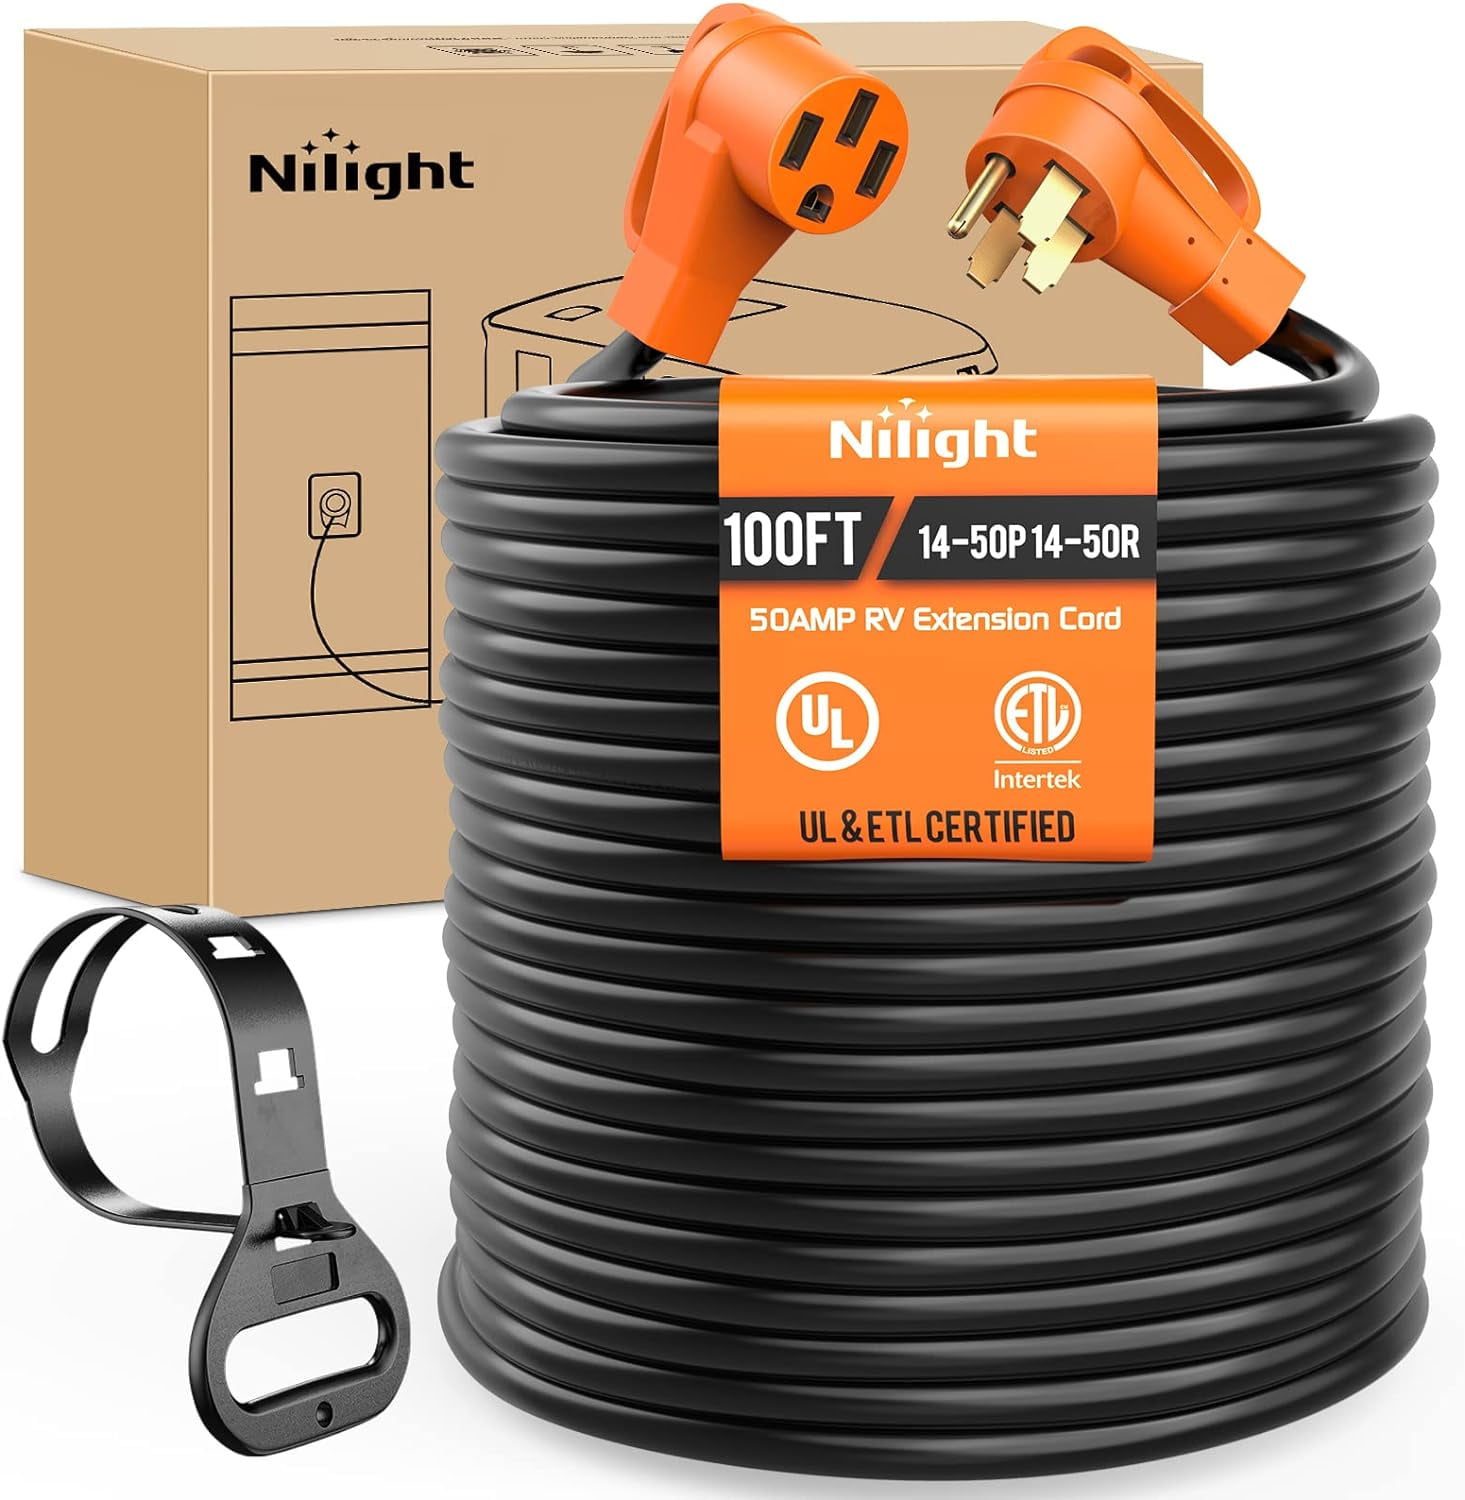 Nilight 50 Amp 100FT RV EV Extension Cord 250V Heavy Duty 6/3+8/1 Gauge  Pure Copper STW Wire UL ETL Listed 4 Prong 14-50P 14-50R 50F/50M Cable Suit 